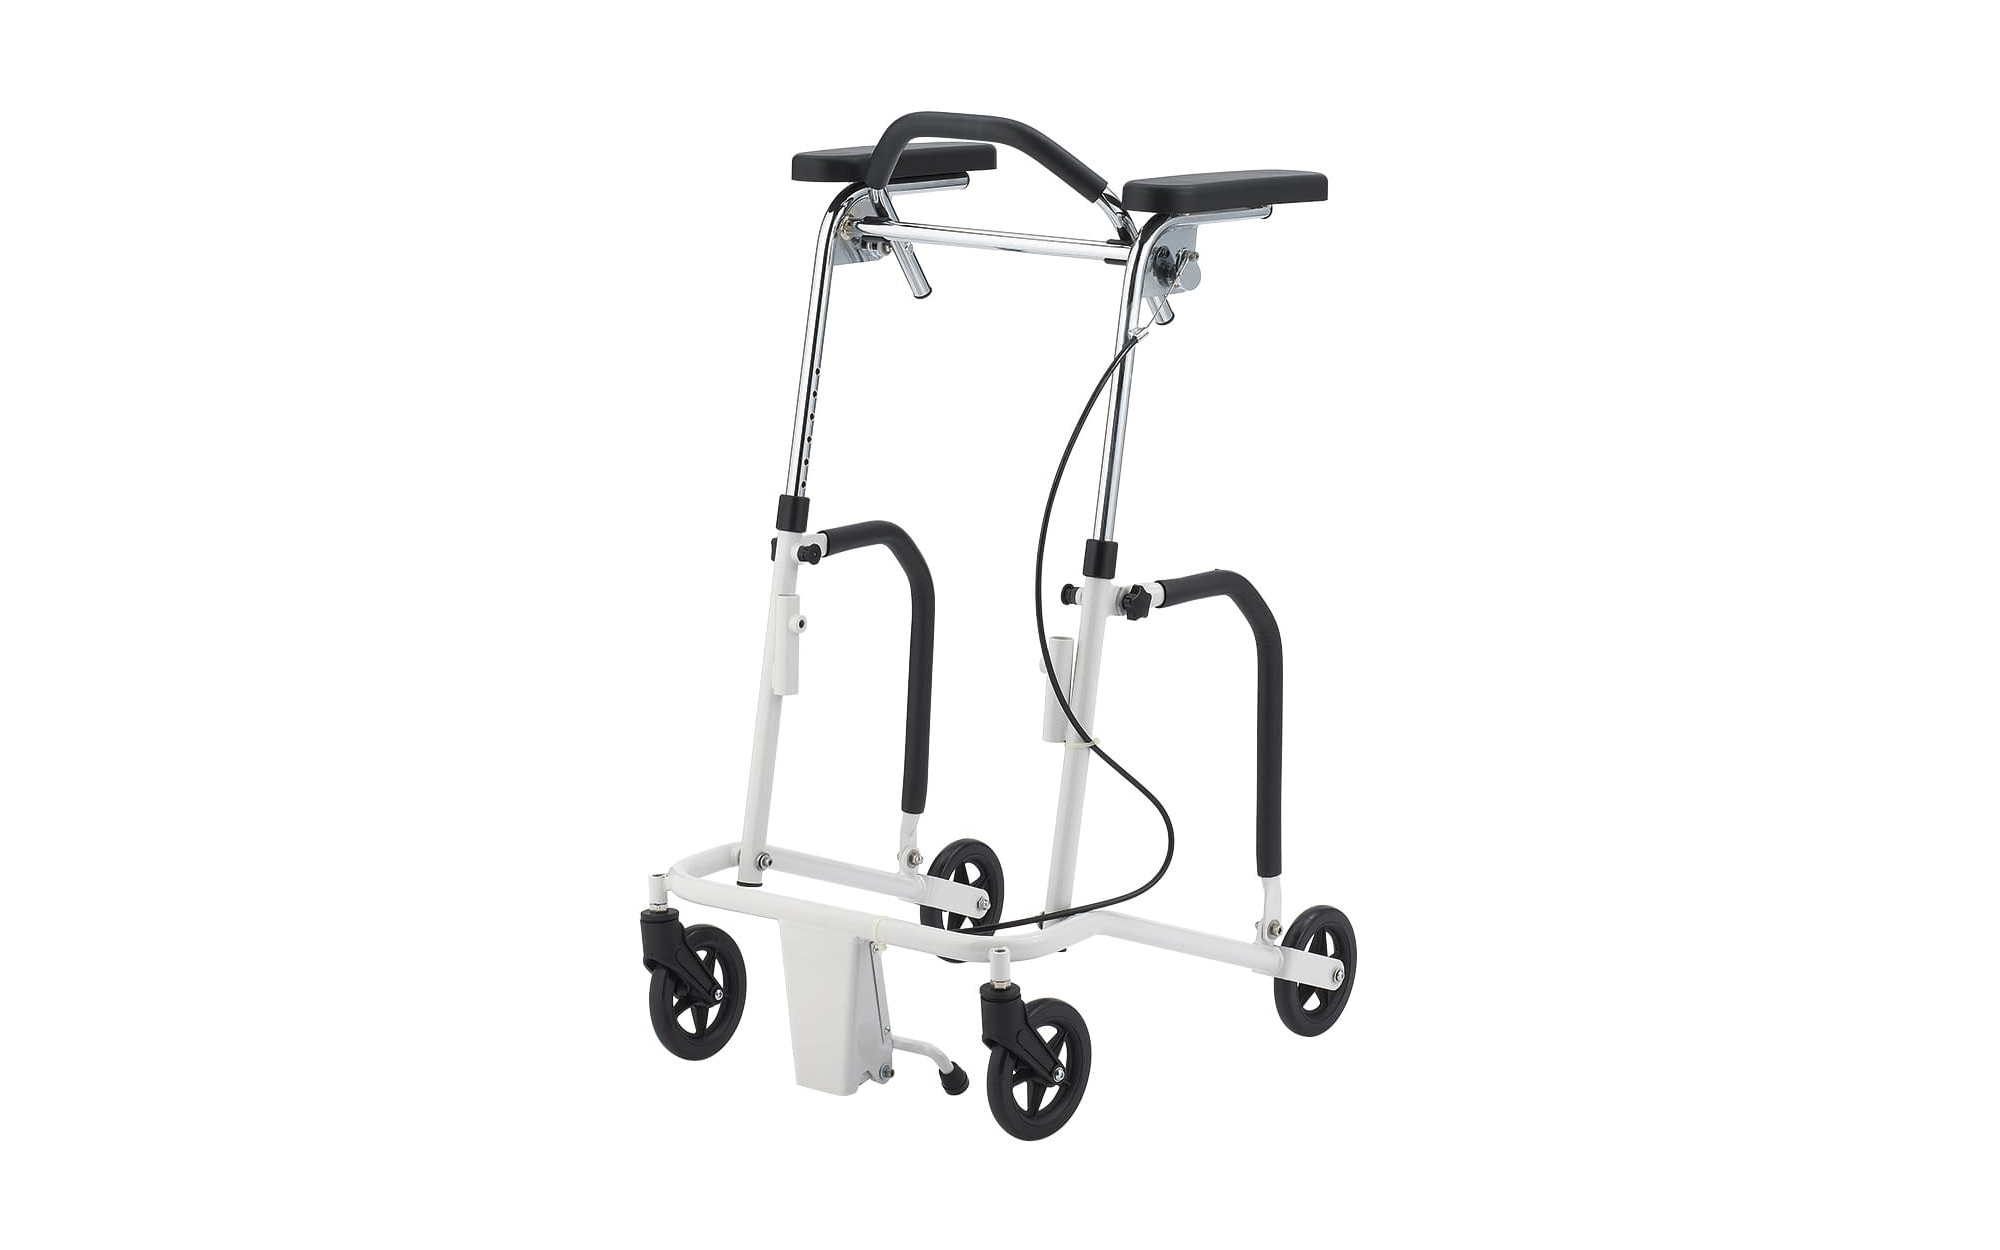 The KW300 Solves Challenges in Walking Rehabilitation